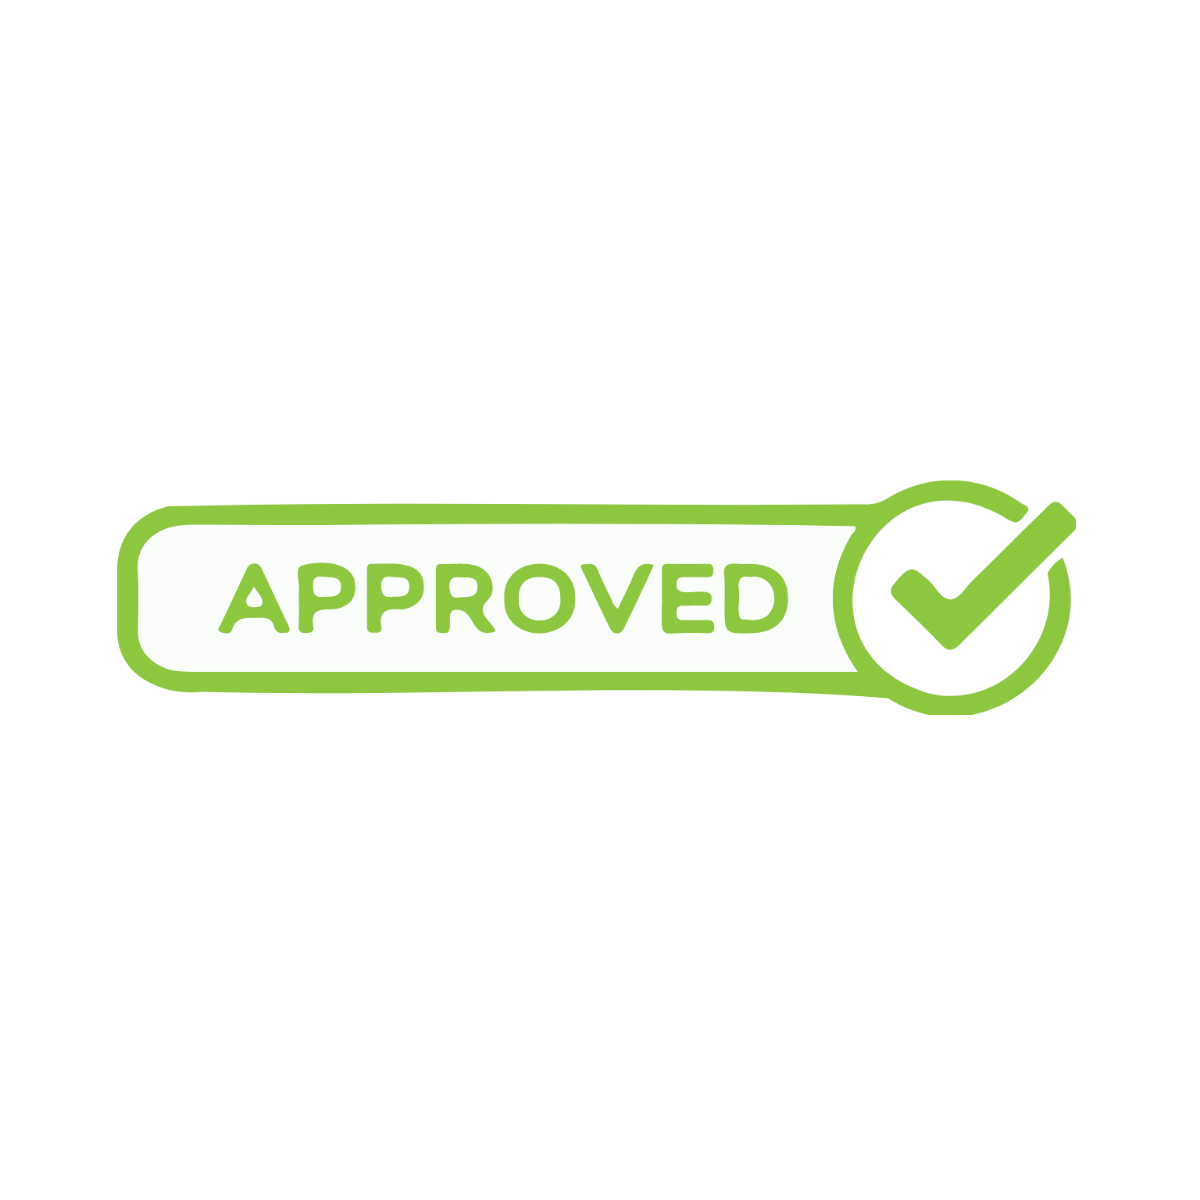 Tick Mark Approved clipart